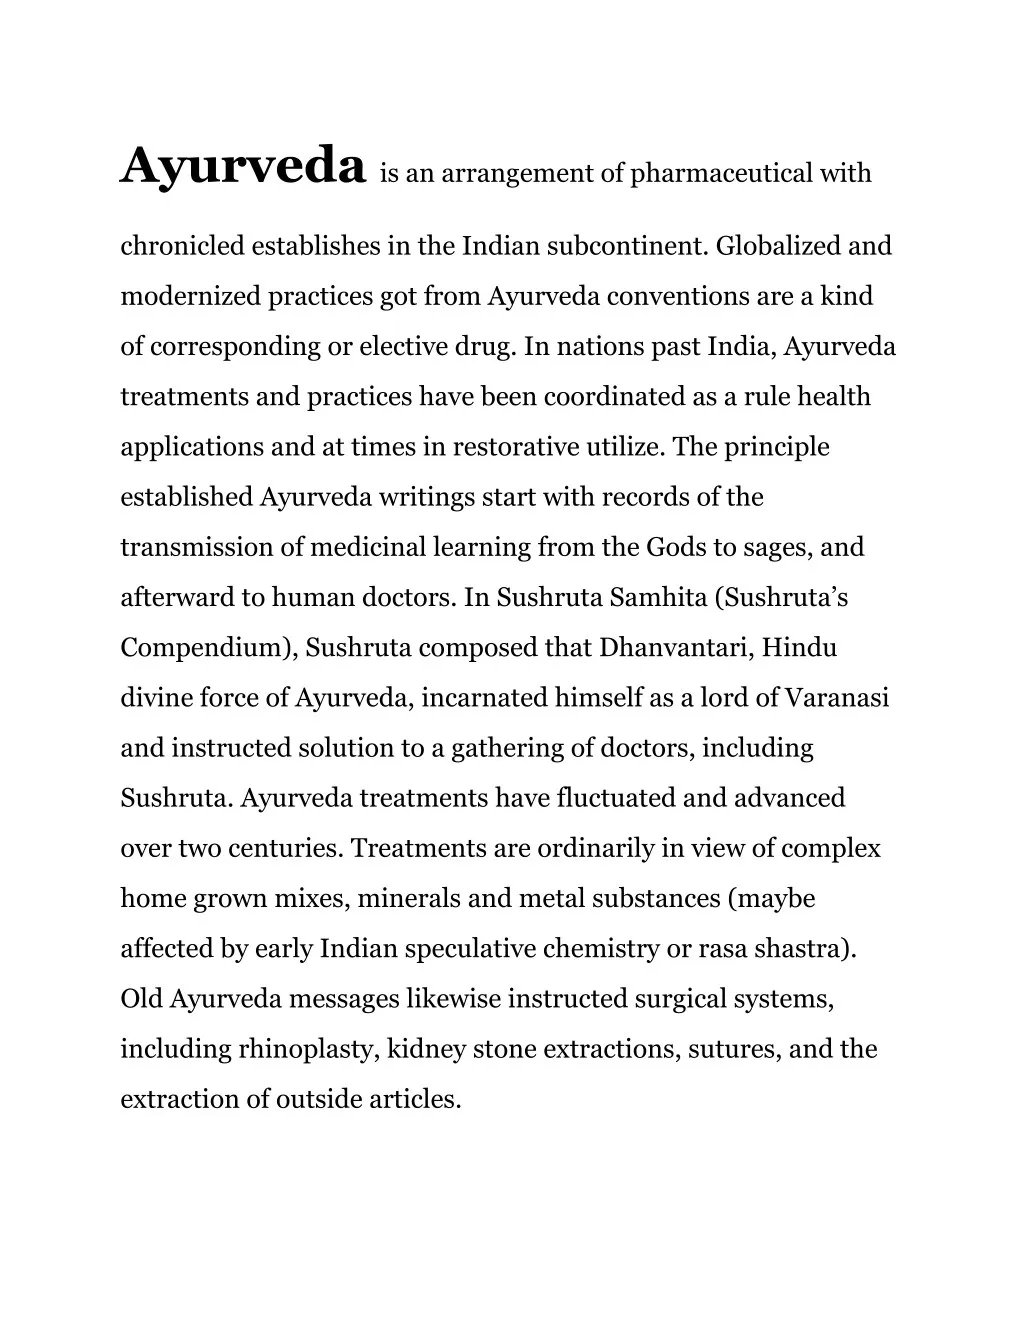 ayurveda is an arrangement of pharmaceutical with